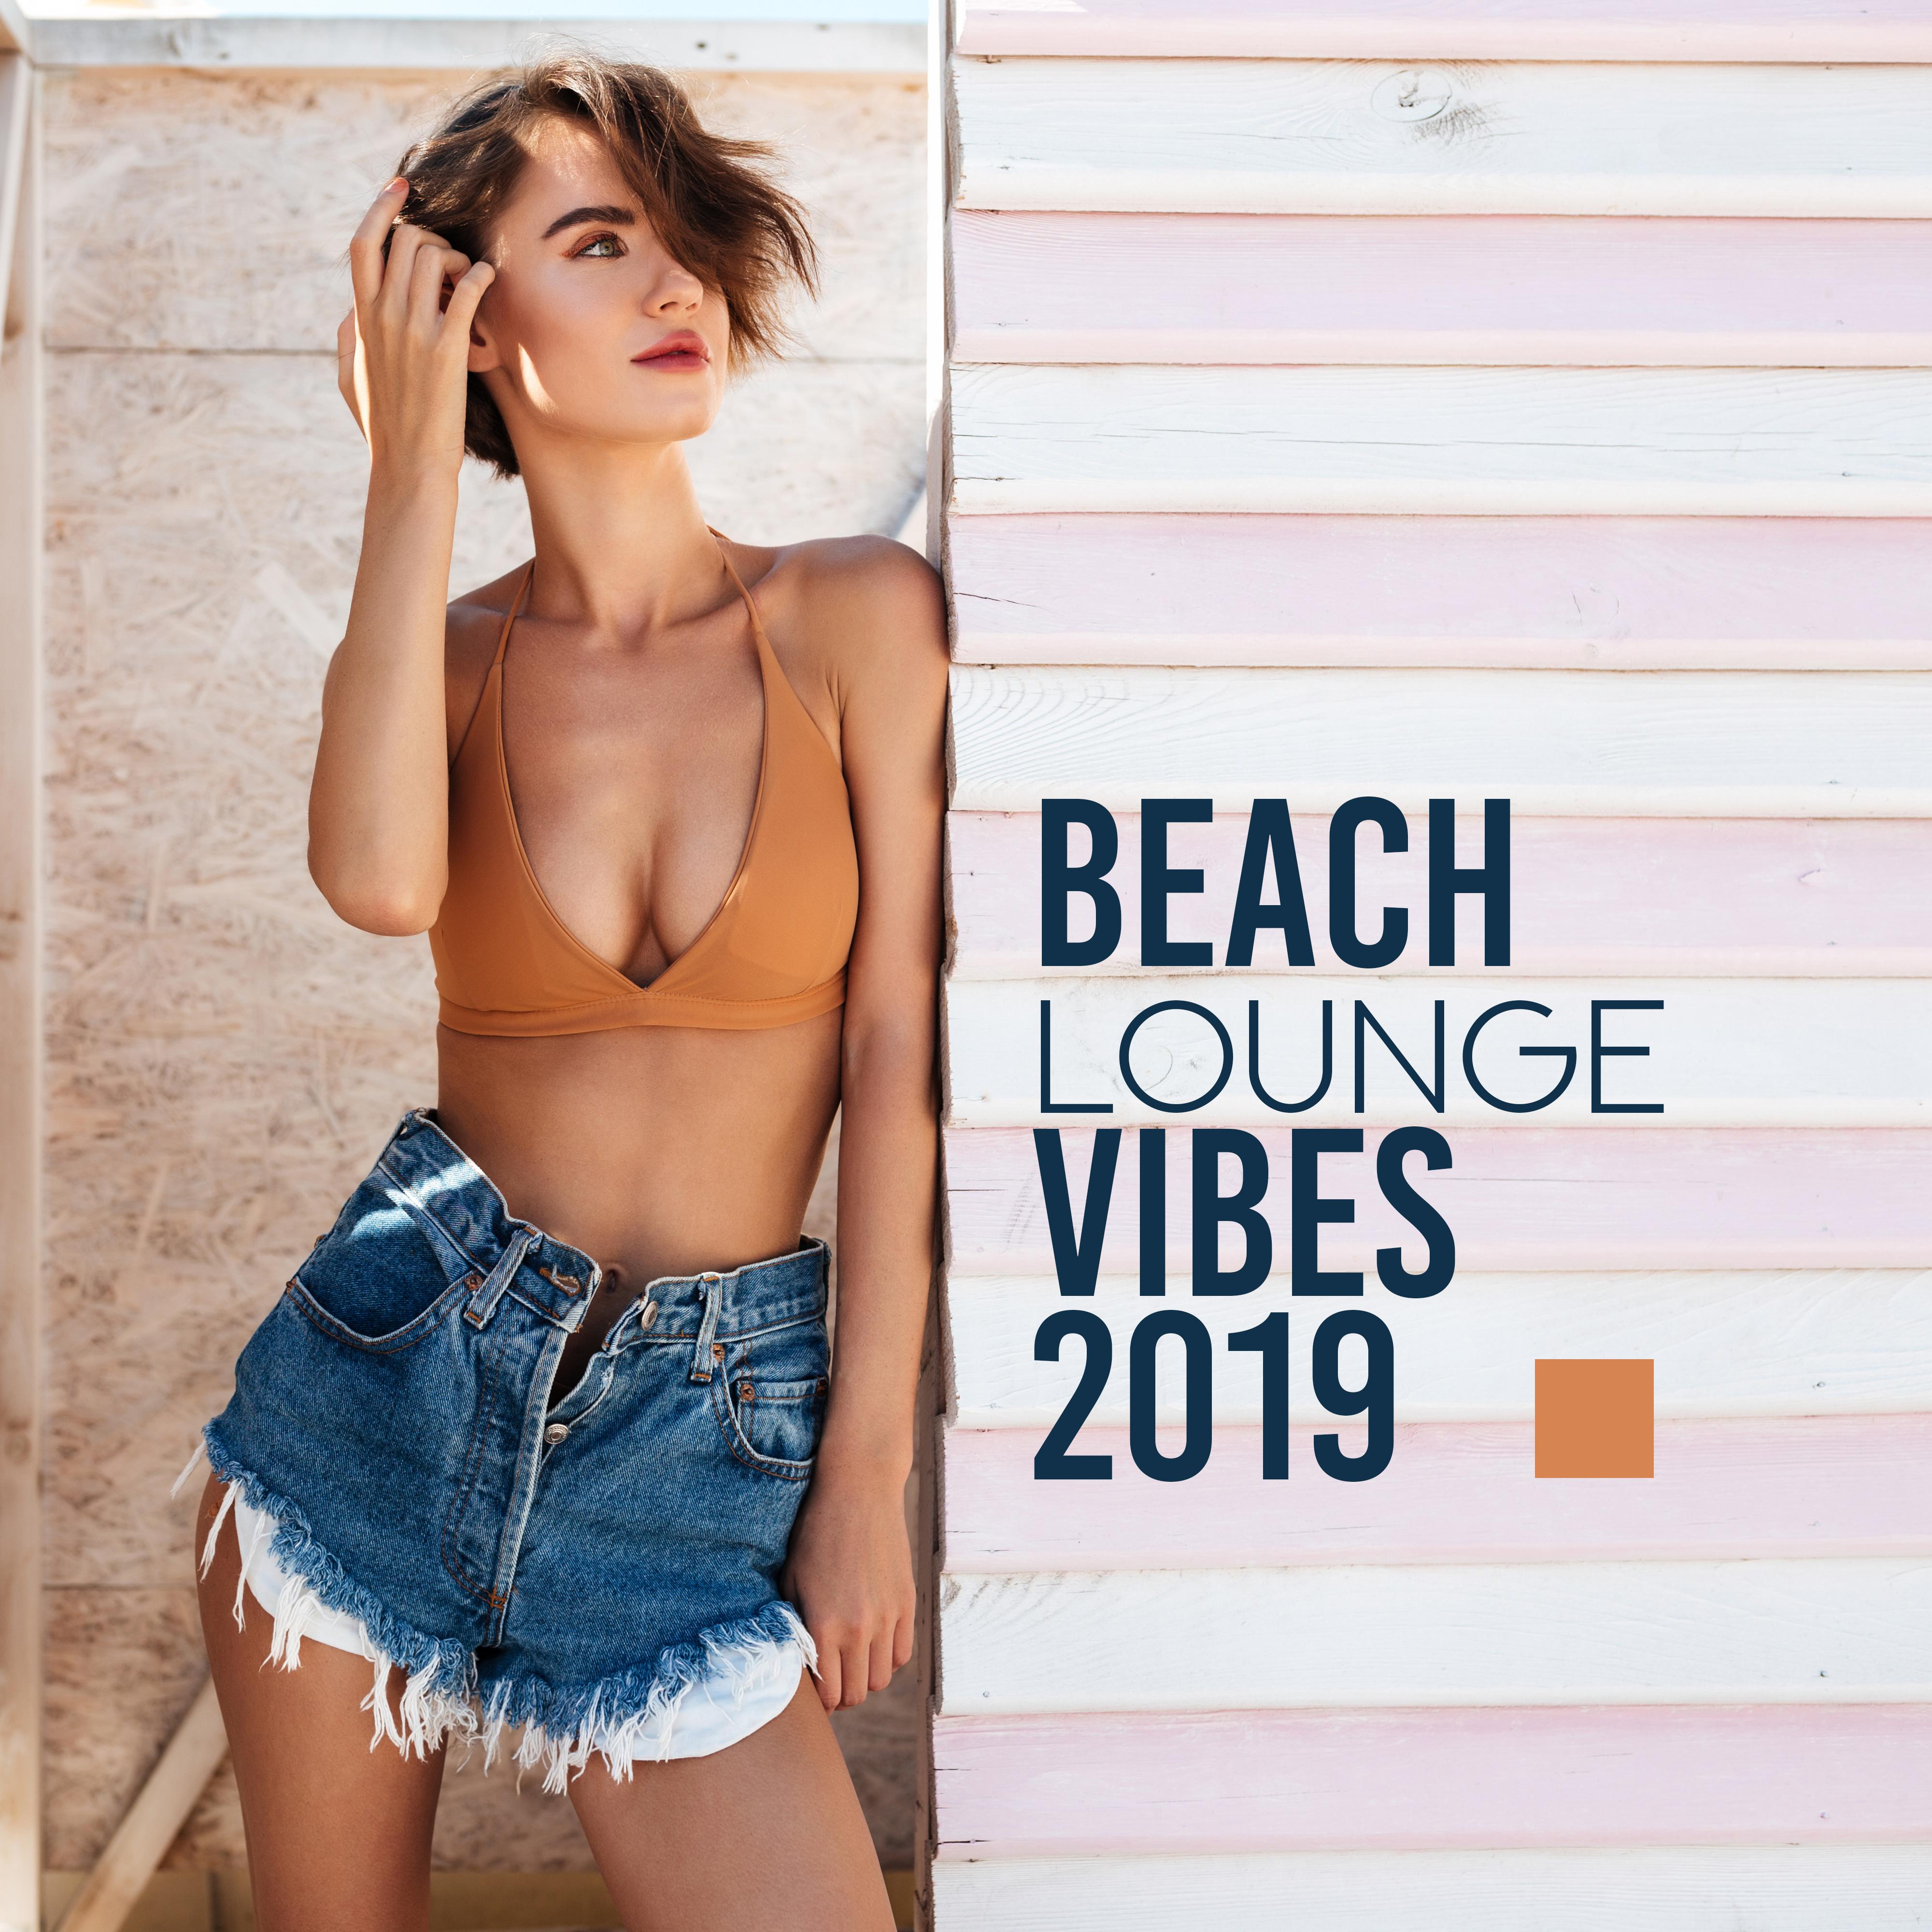 Beach Lounge Vibes 2019: Compilation of Best 2019 Chillout Music, Deep Beats & Soft Melodies, Songs for Celebrating Vacation Time, Relaxation Blissful Moments